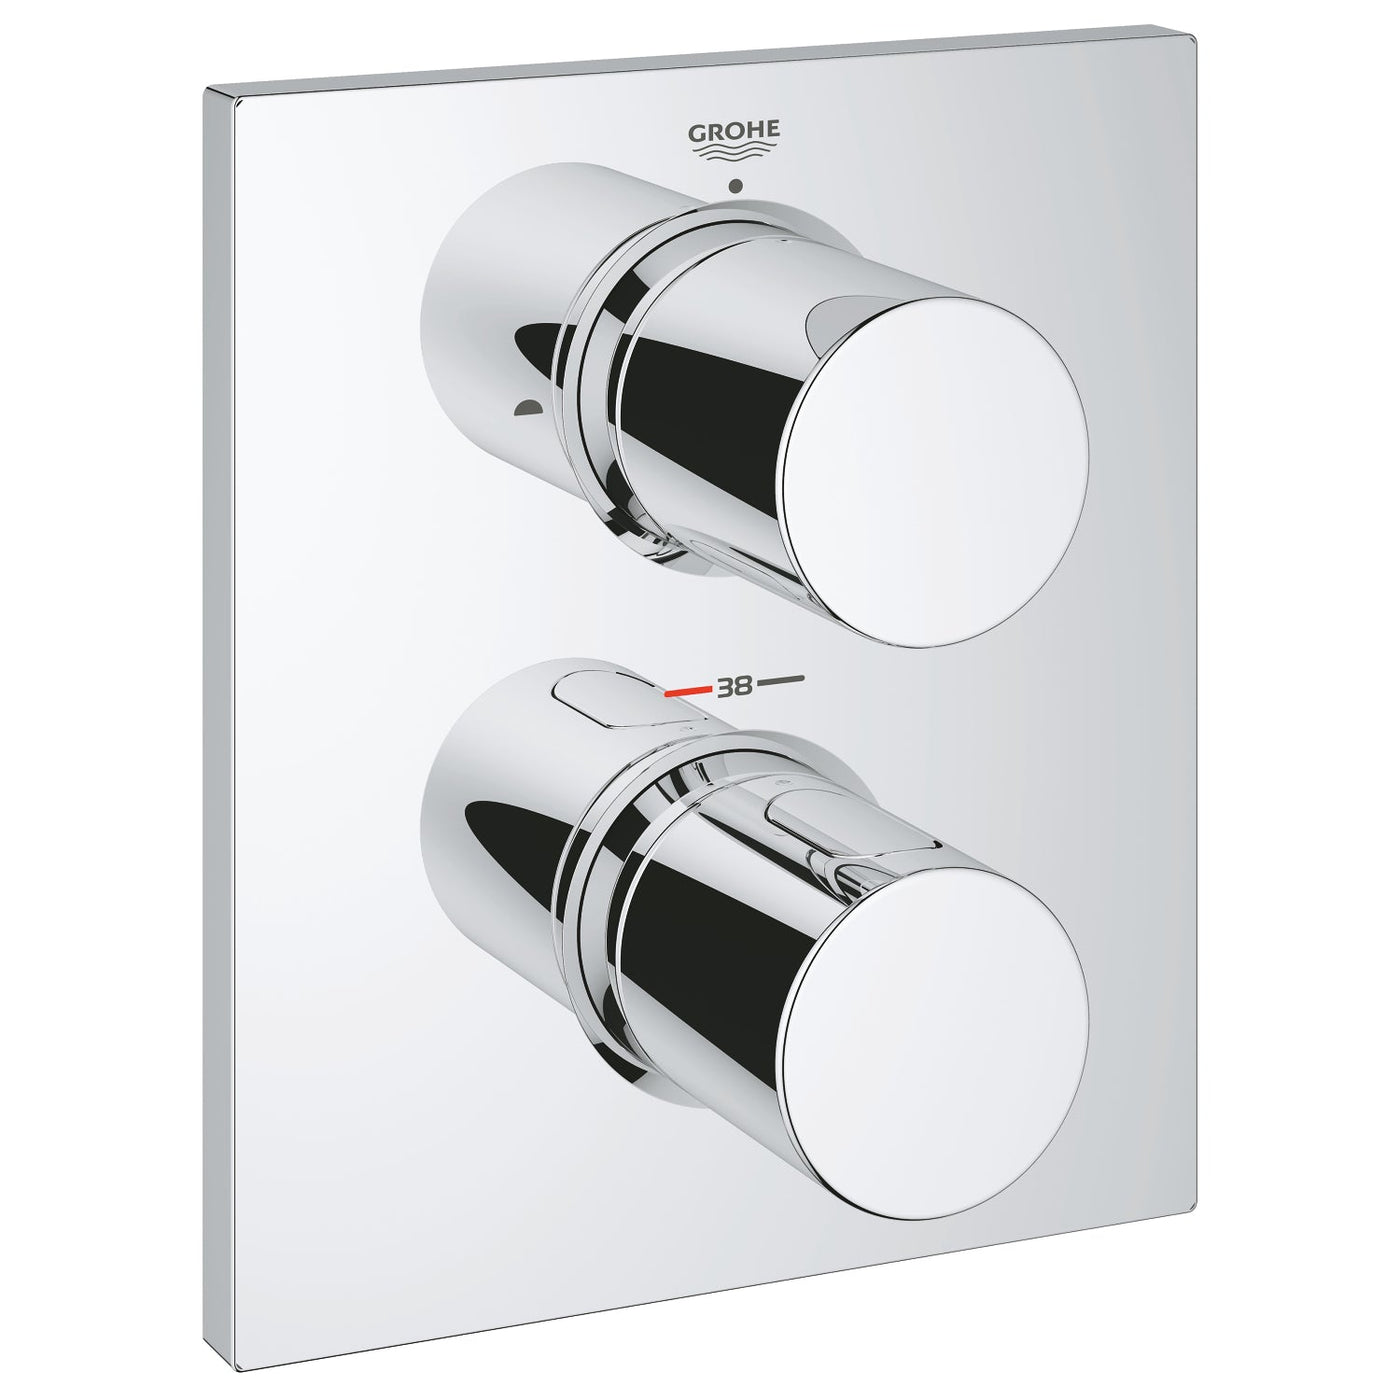 Grohe Chrome Grohtherm F Thermostatic Trim with integrated 2-way diverter - Letta London - Twin Shower valves